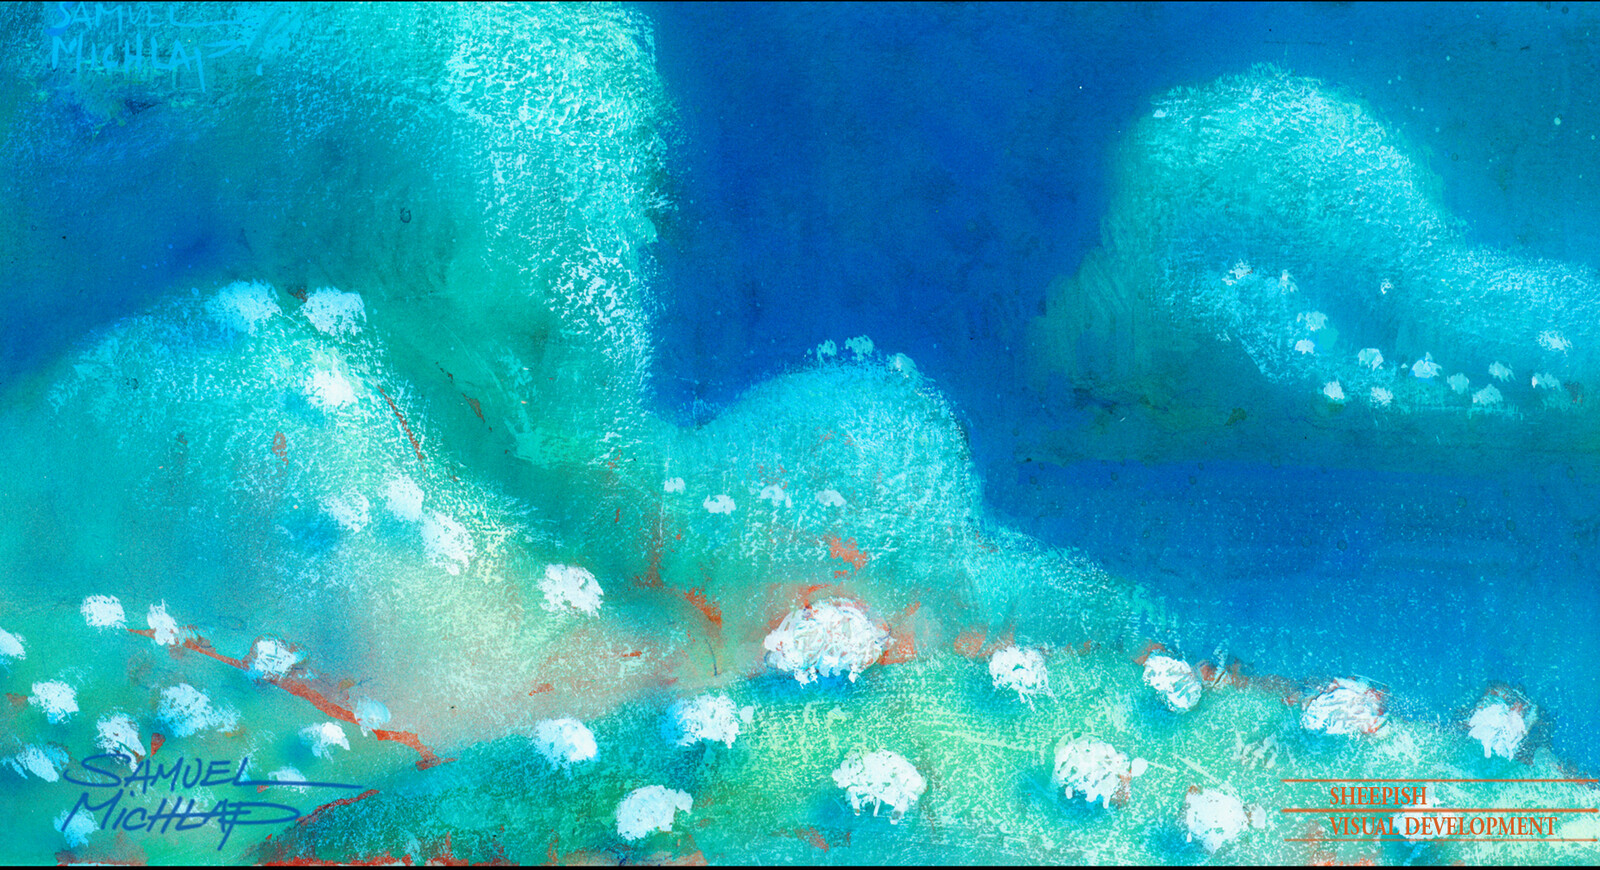 Dreaming sheep. Gouache and color pencil